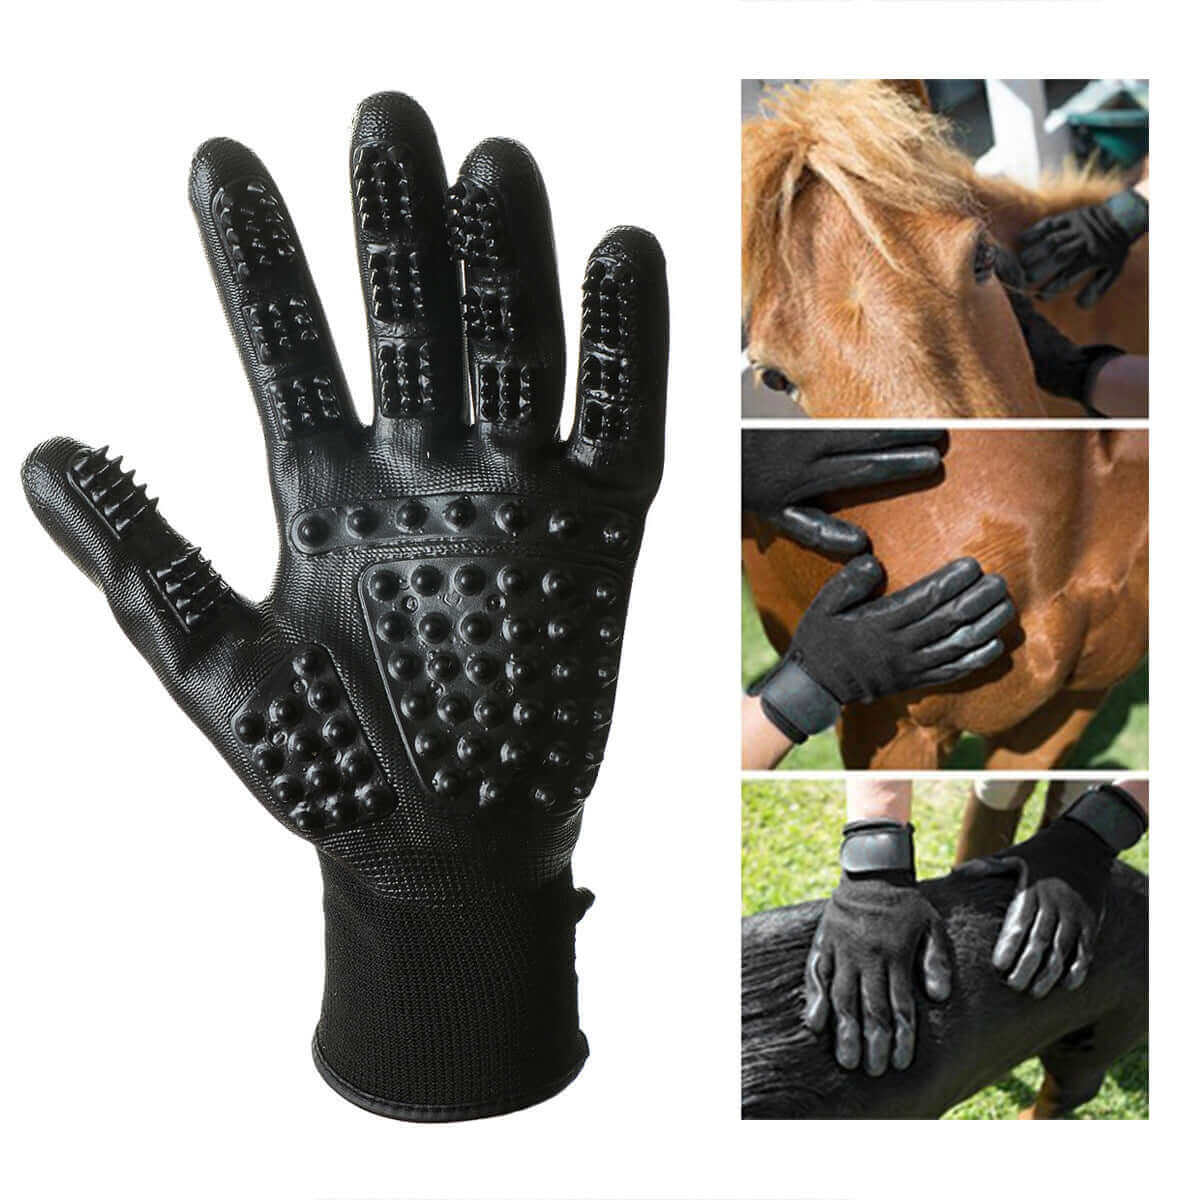 Bath Massage Gloves Brush |Easy Grooming | Paws Palace StoreElevate pet bath time with our gentle bath massage glove brush. Cleans & soothes for a shiny coat. Perfect bath glove for a happy pet.£20.90#PetGrooming #BathAccessories #PetHygiene #MassagingBru